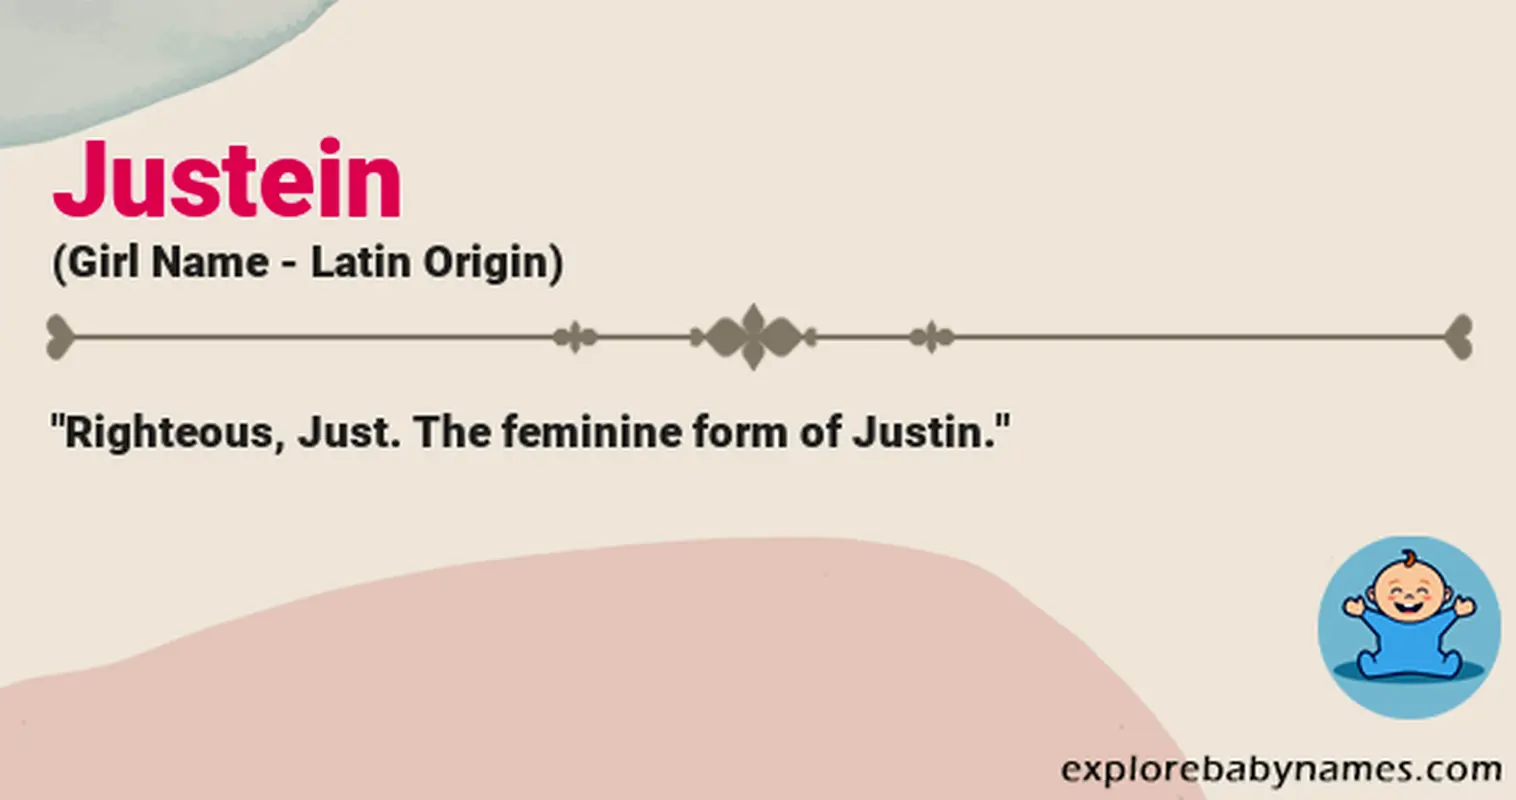 Meaning of Justein